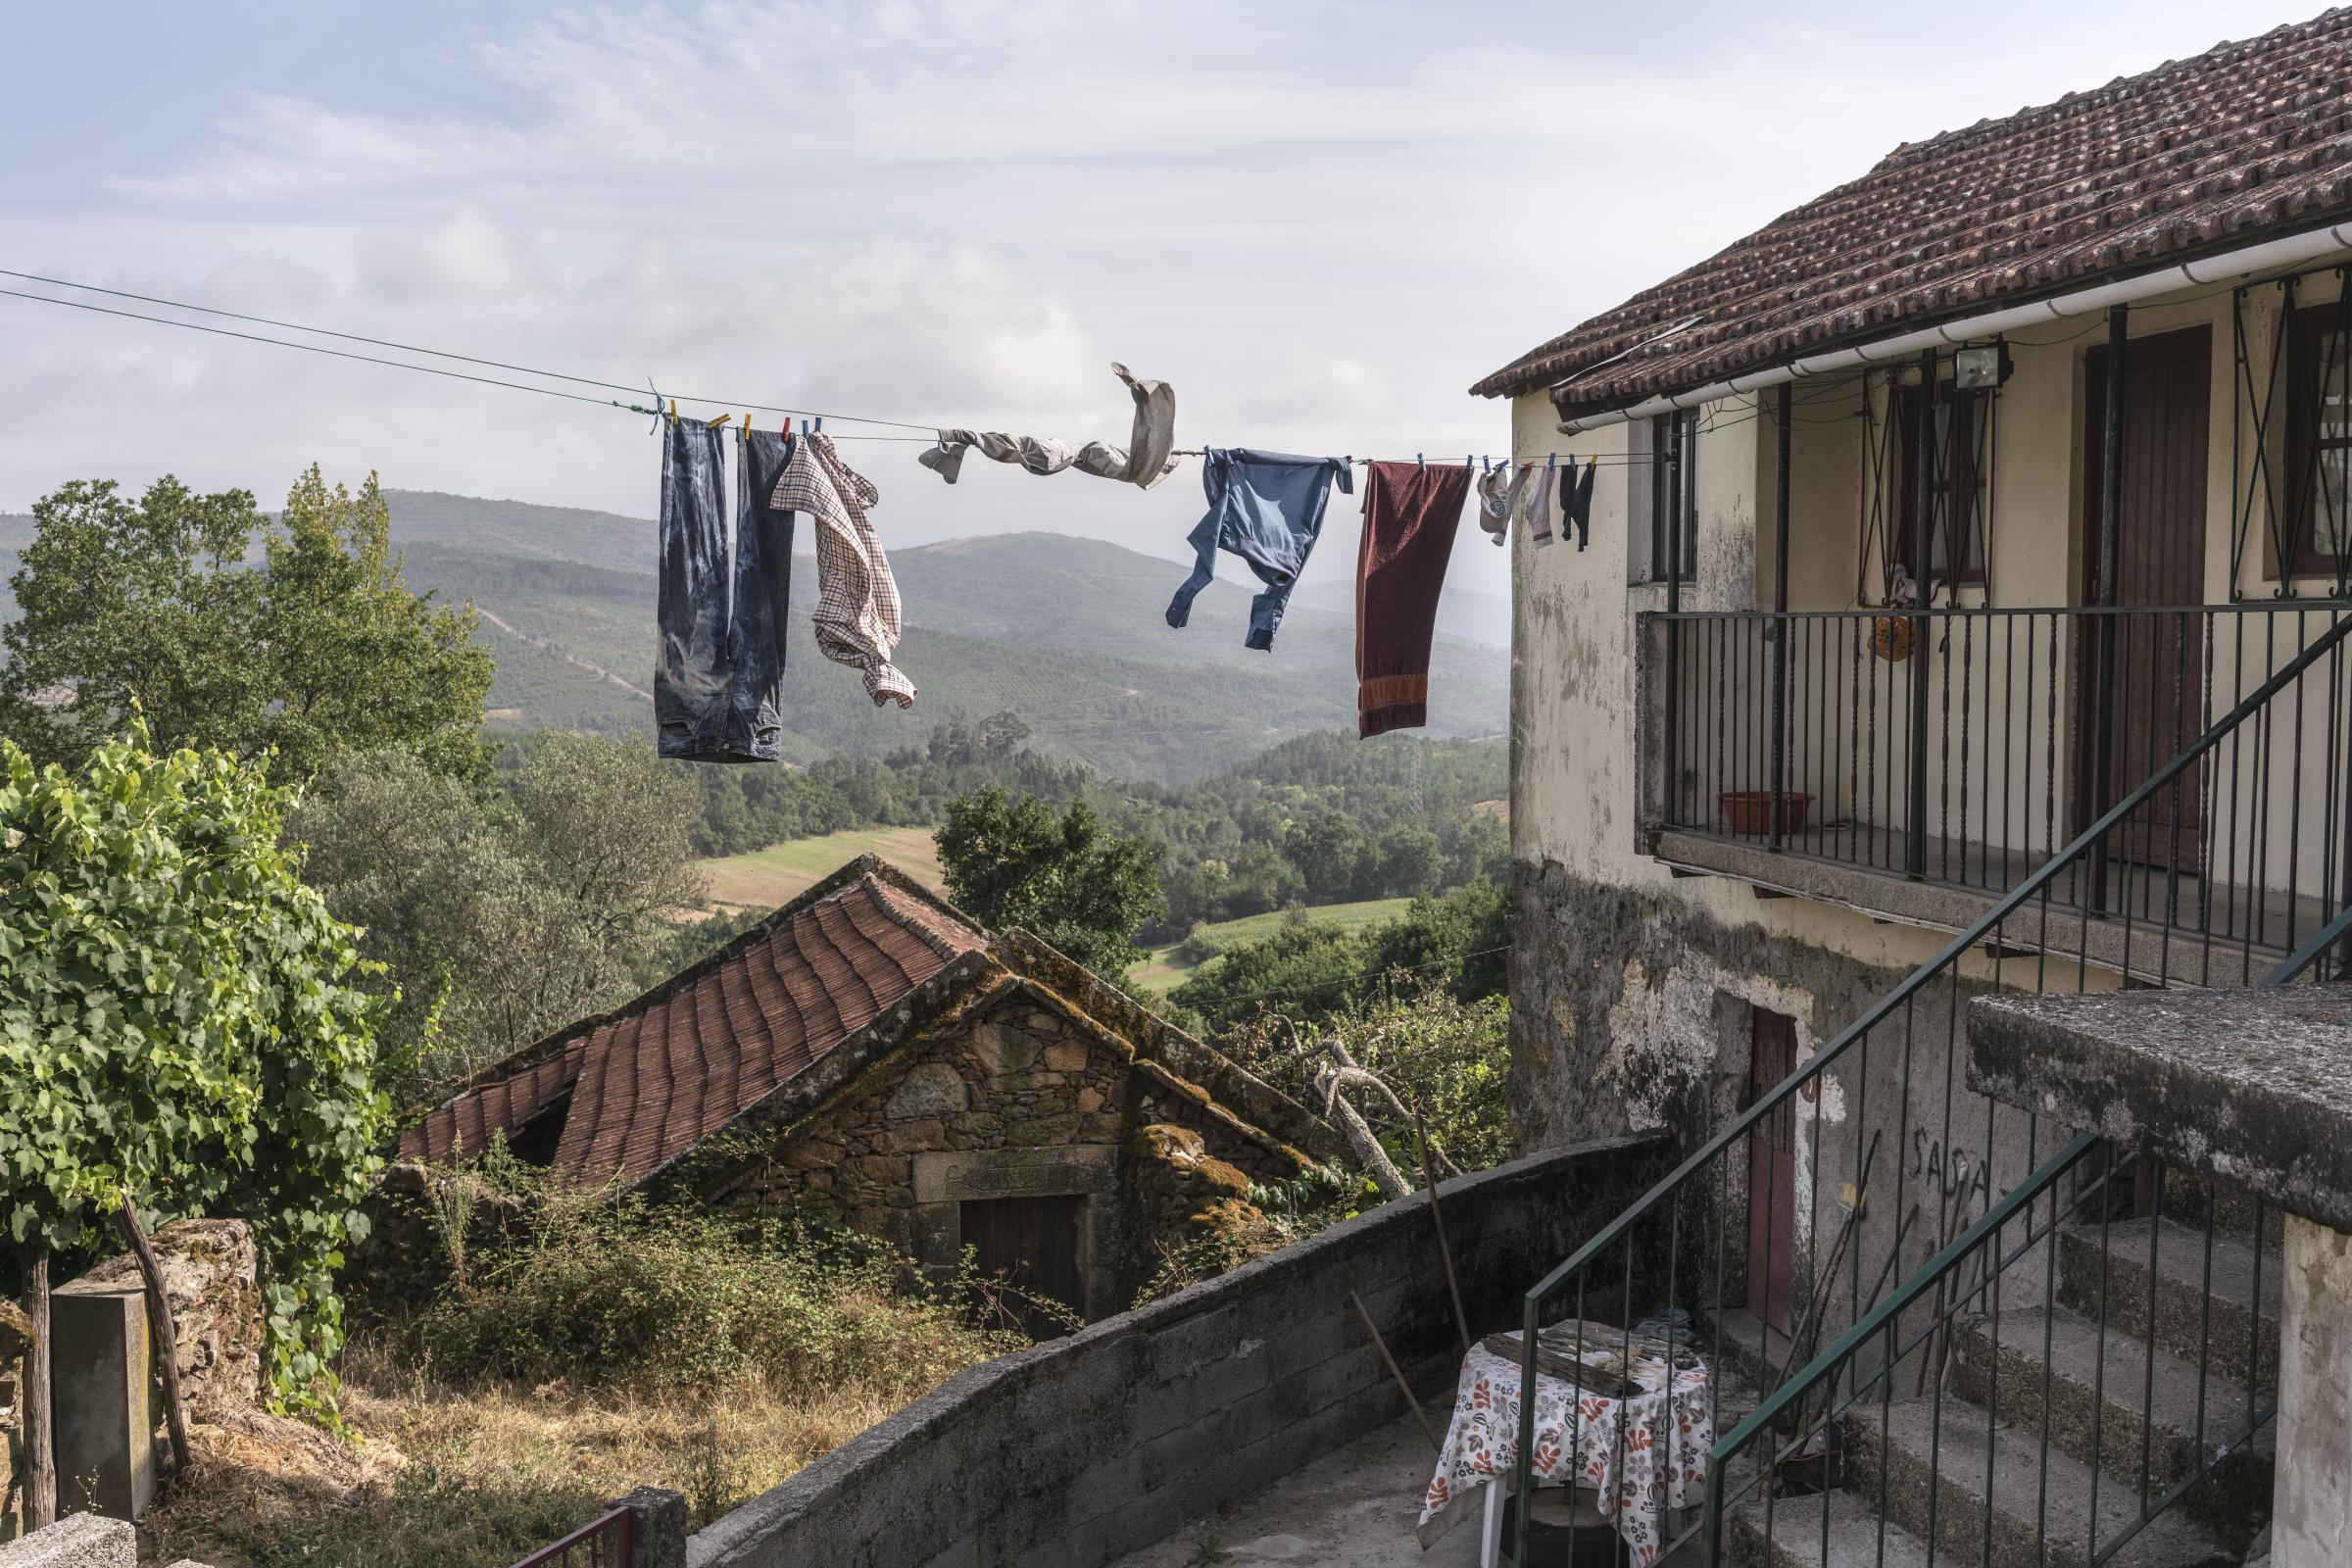 Portugal: the Lithium Dilemma - Covas do Barroso, August 28th, 2021 - Clothes hanging to...